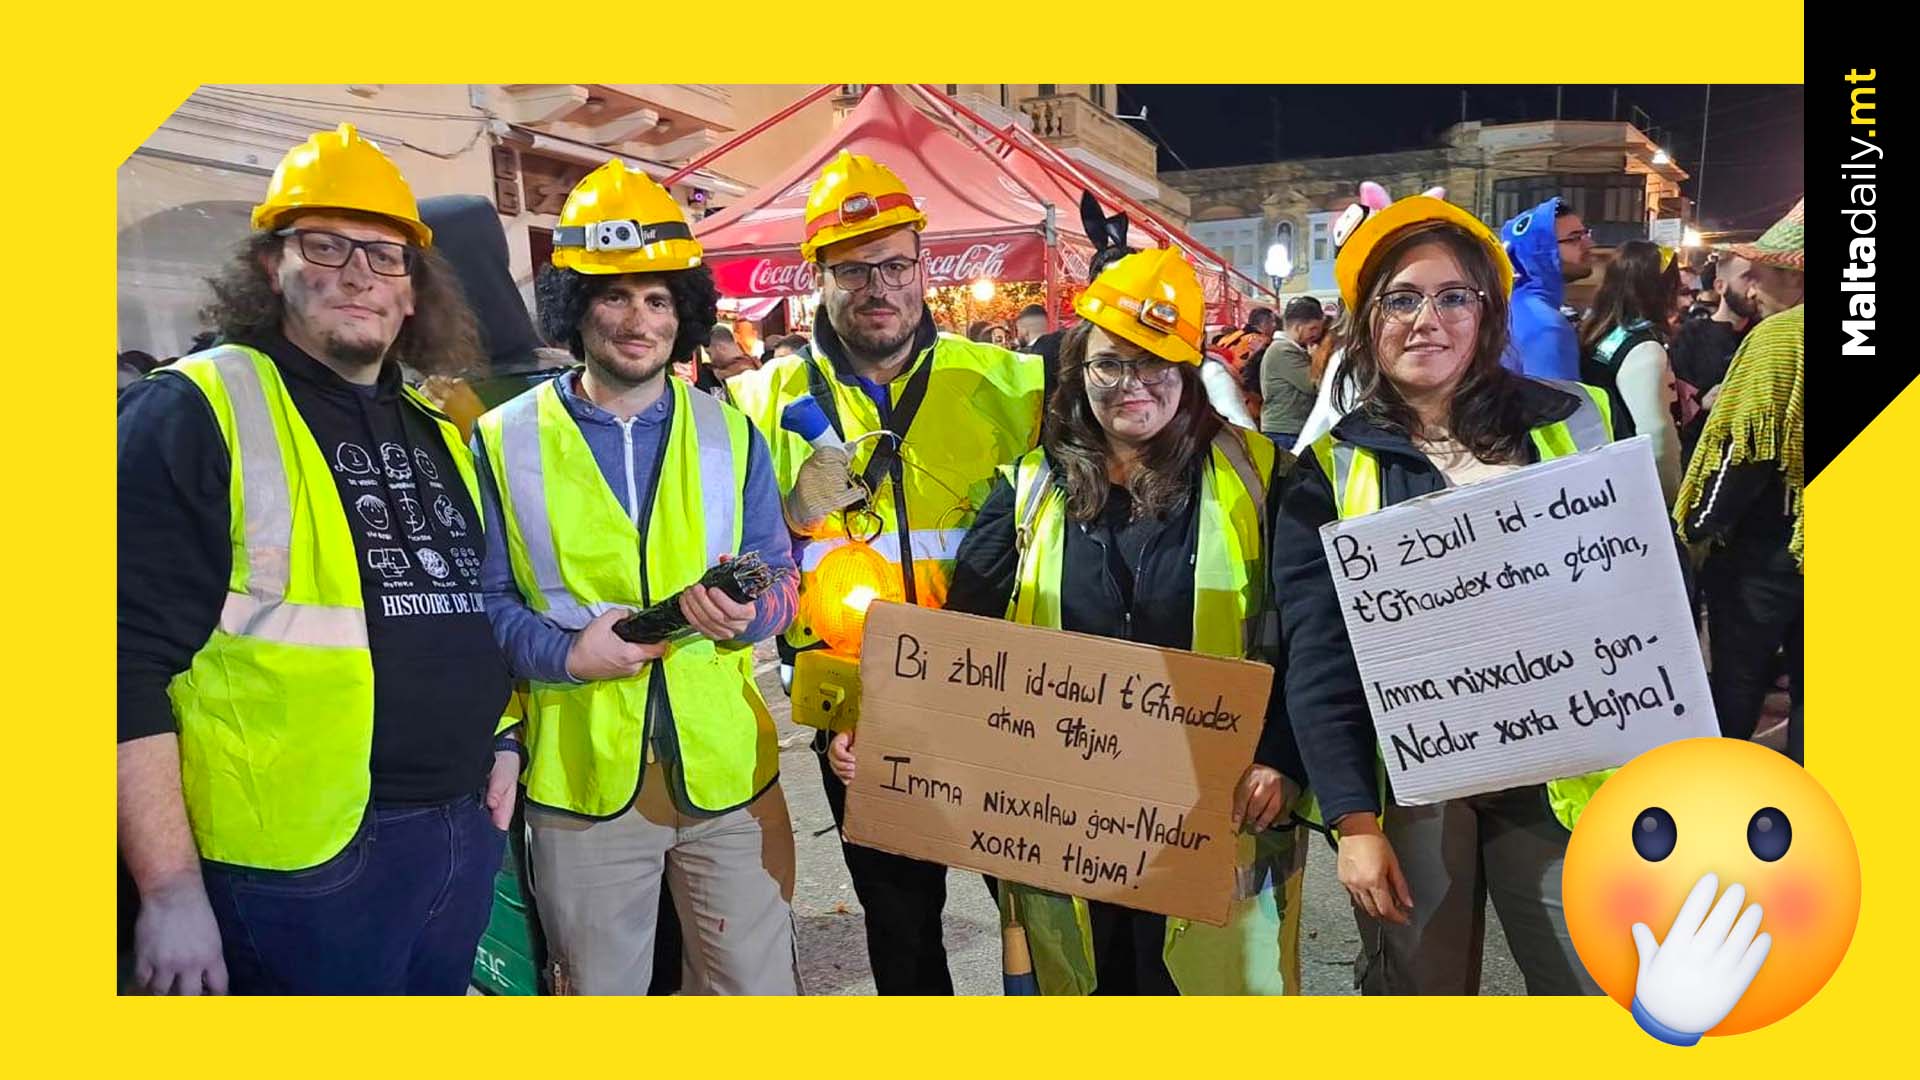 Maltese carnival goers dress up as contractor who caused Gozo black out